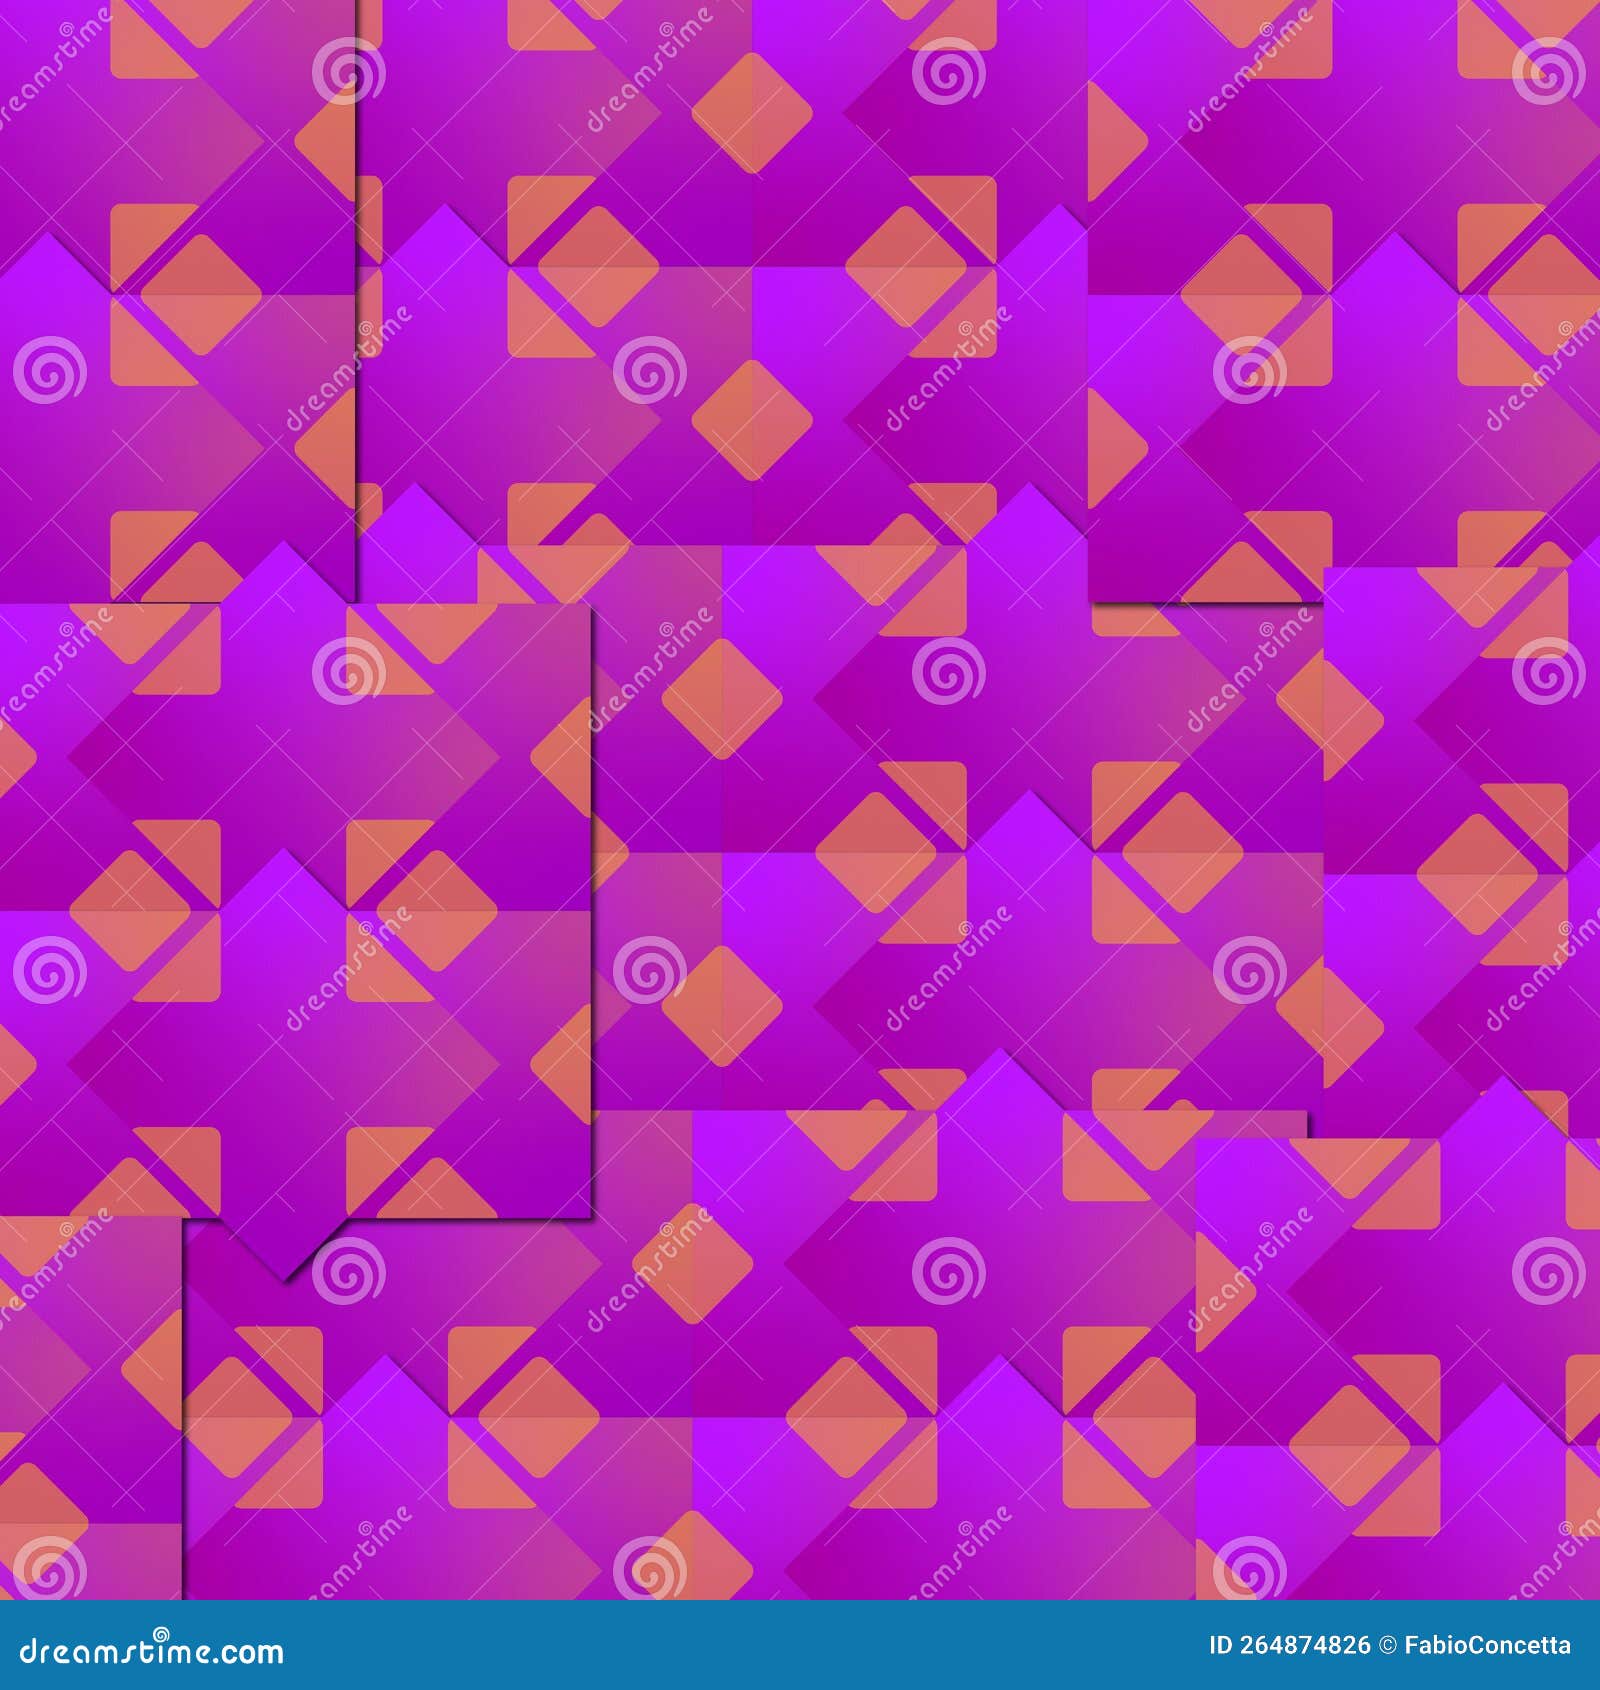 Pattern Gift Card Wallpaper Background Seamless Colorful Creative